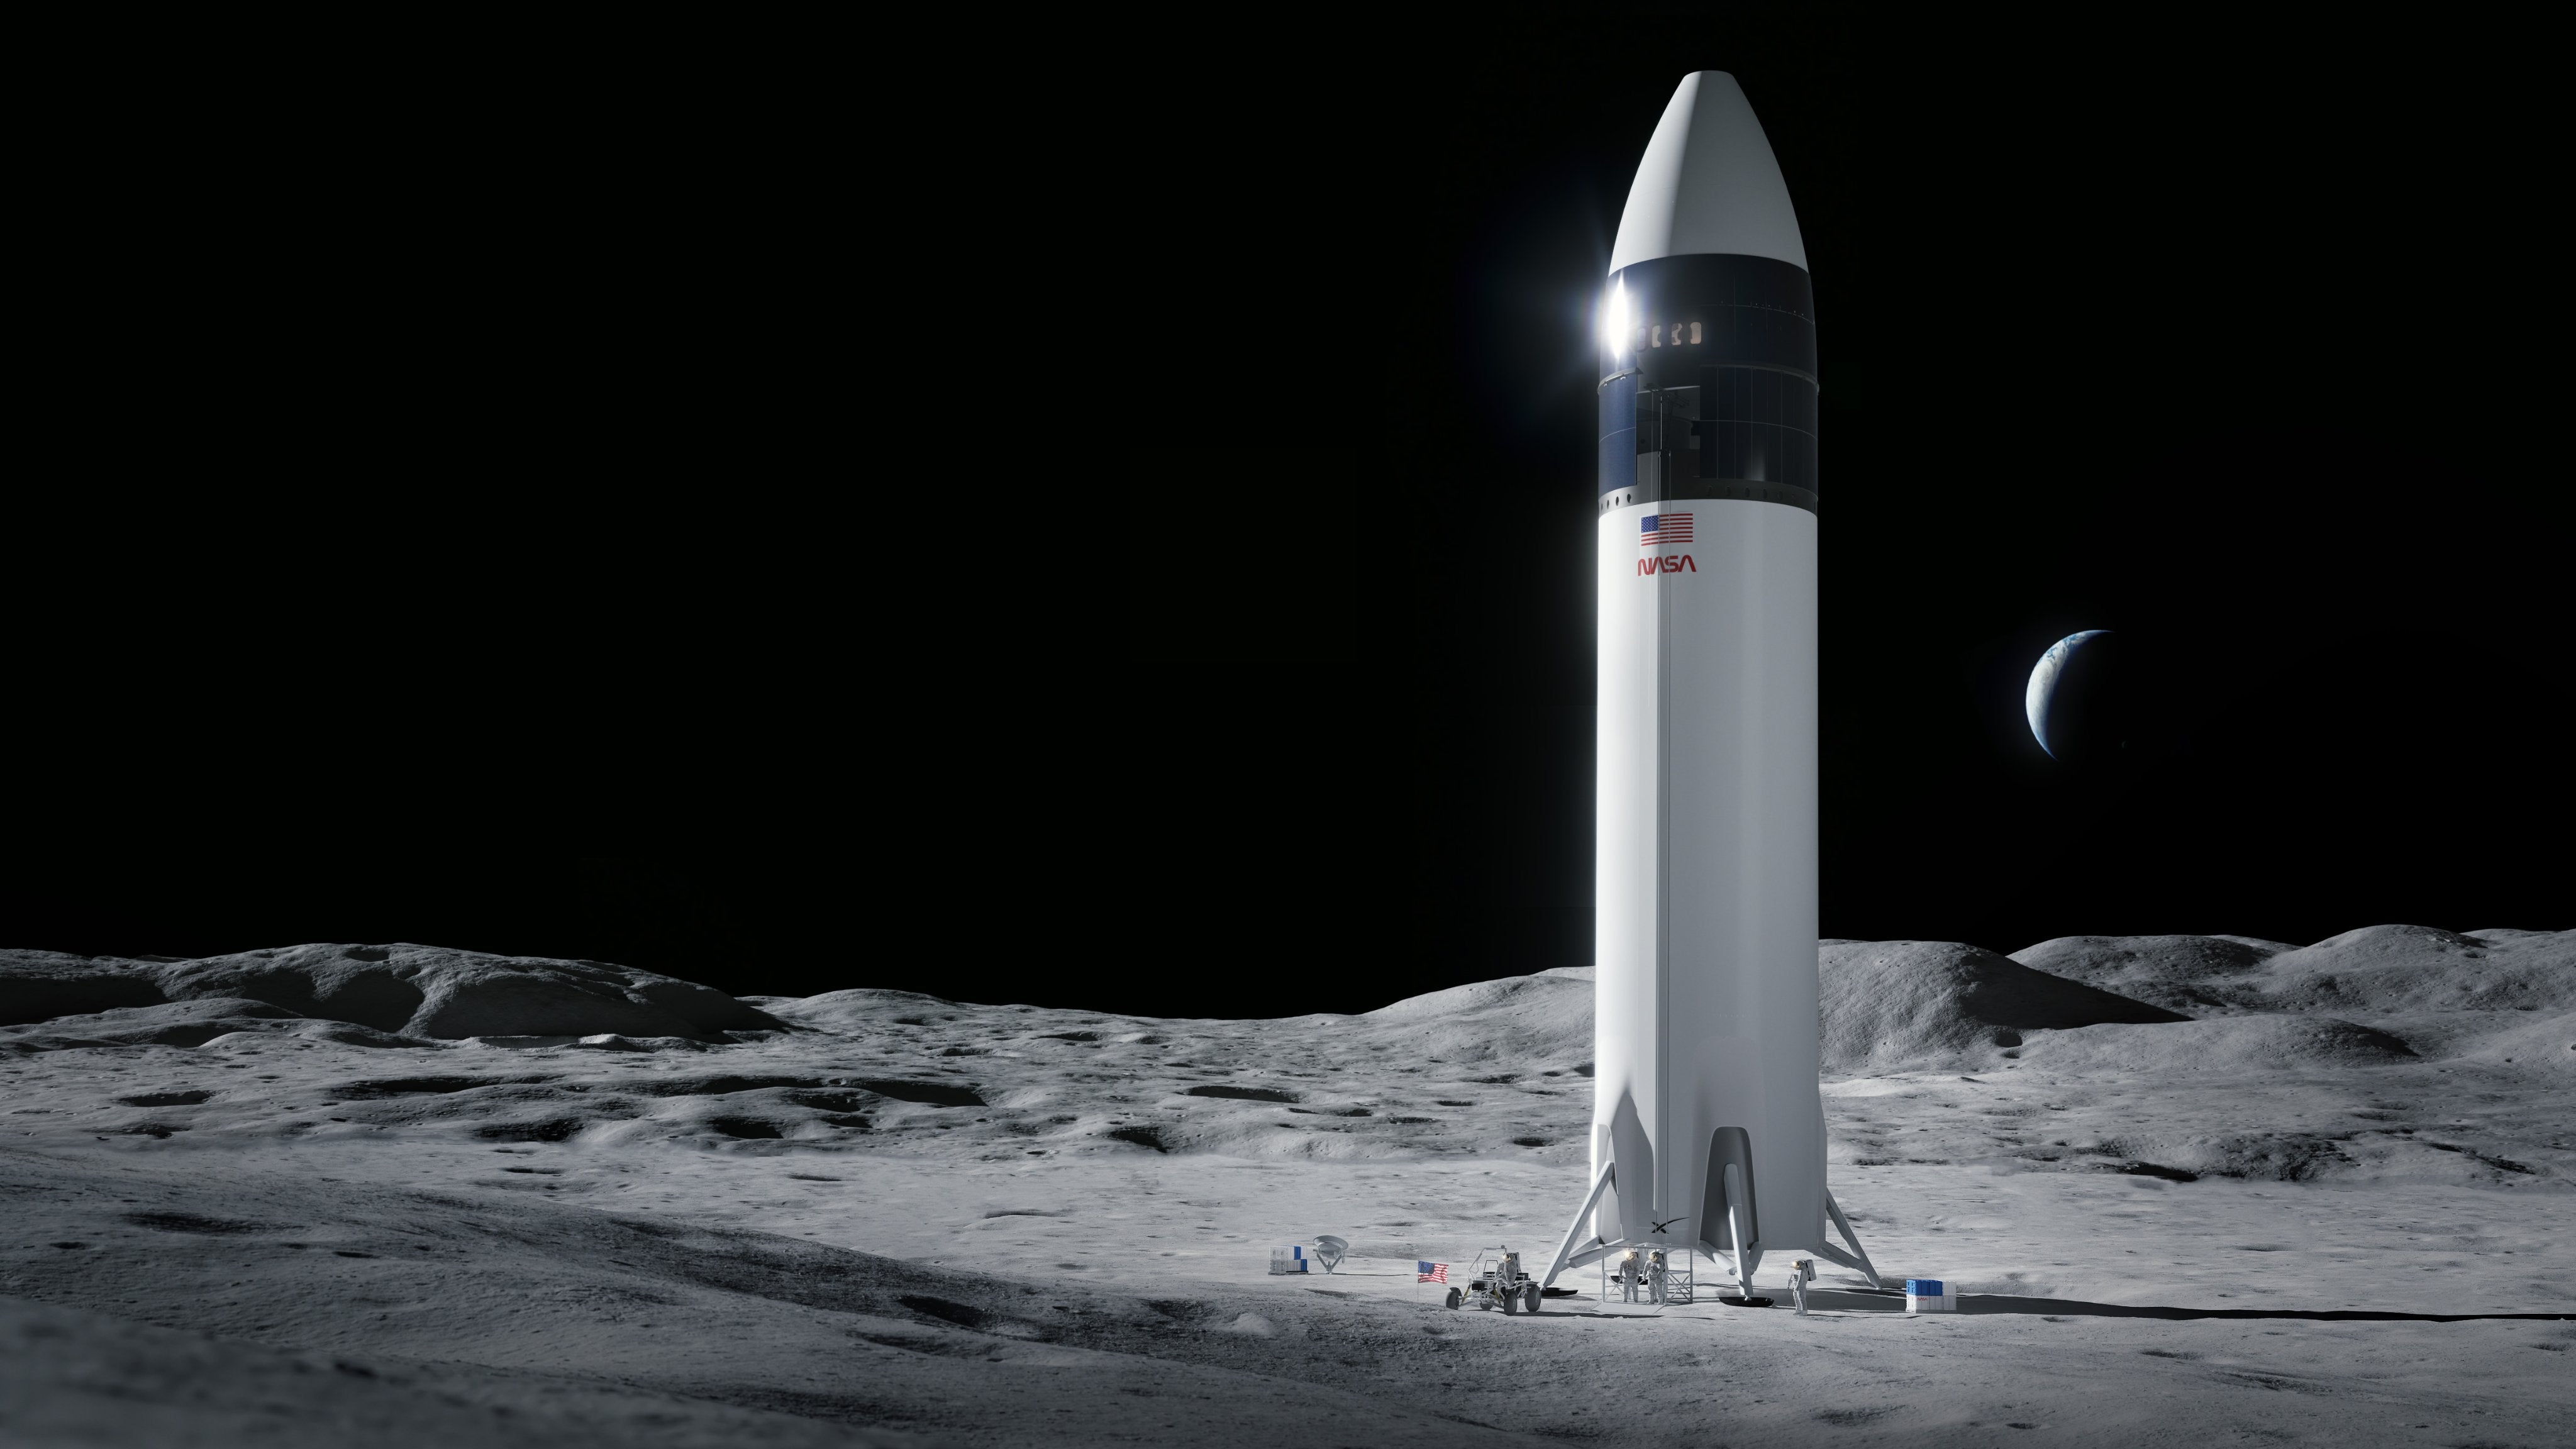 SpaceX Wins $2.89 Billion NASA Contract To Develop A Starship To Land Astronauts On The Moon